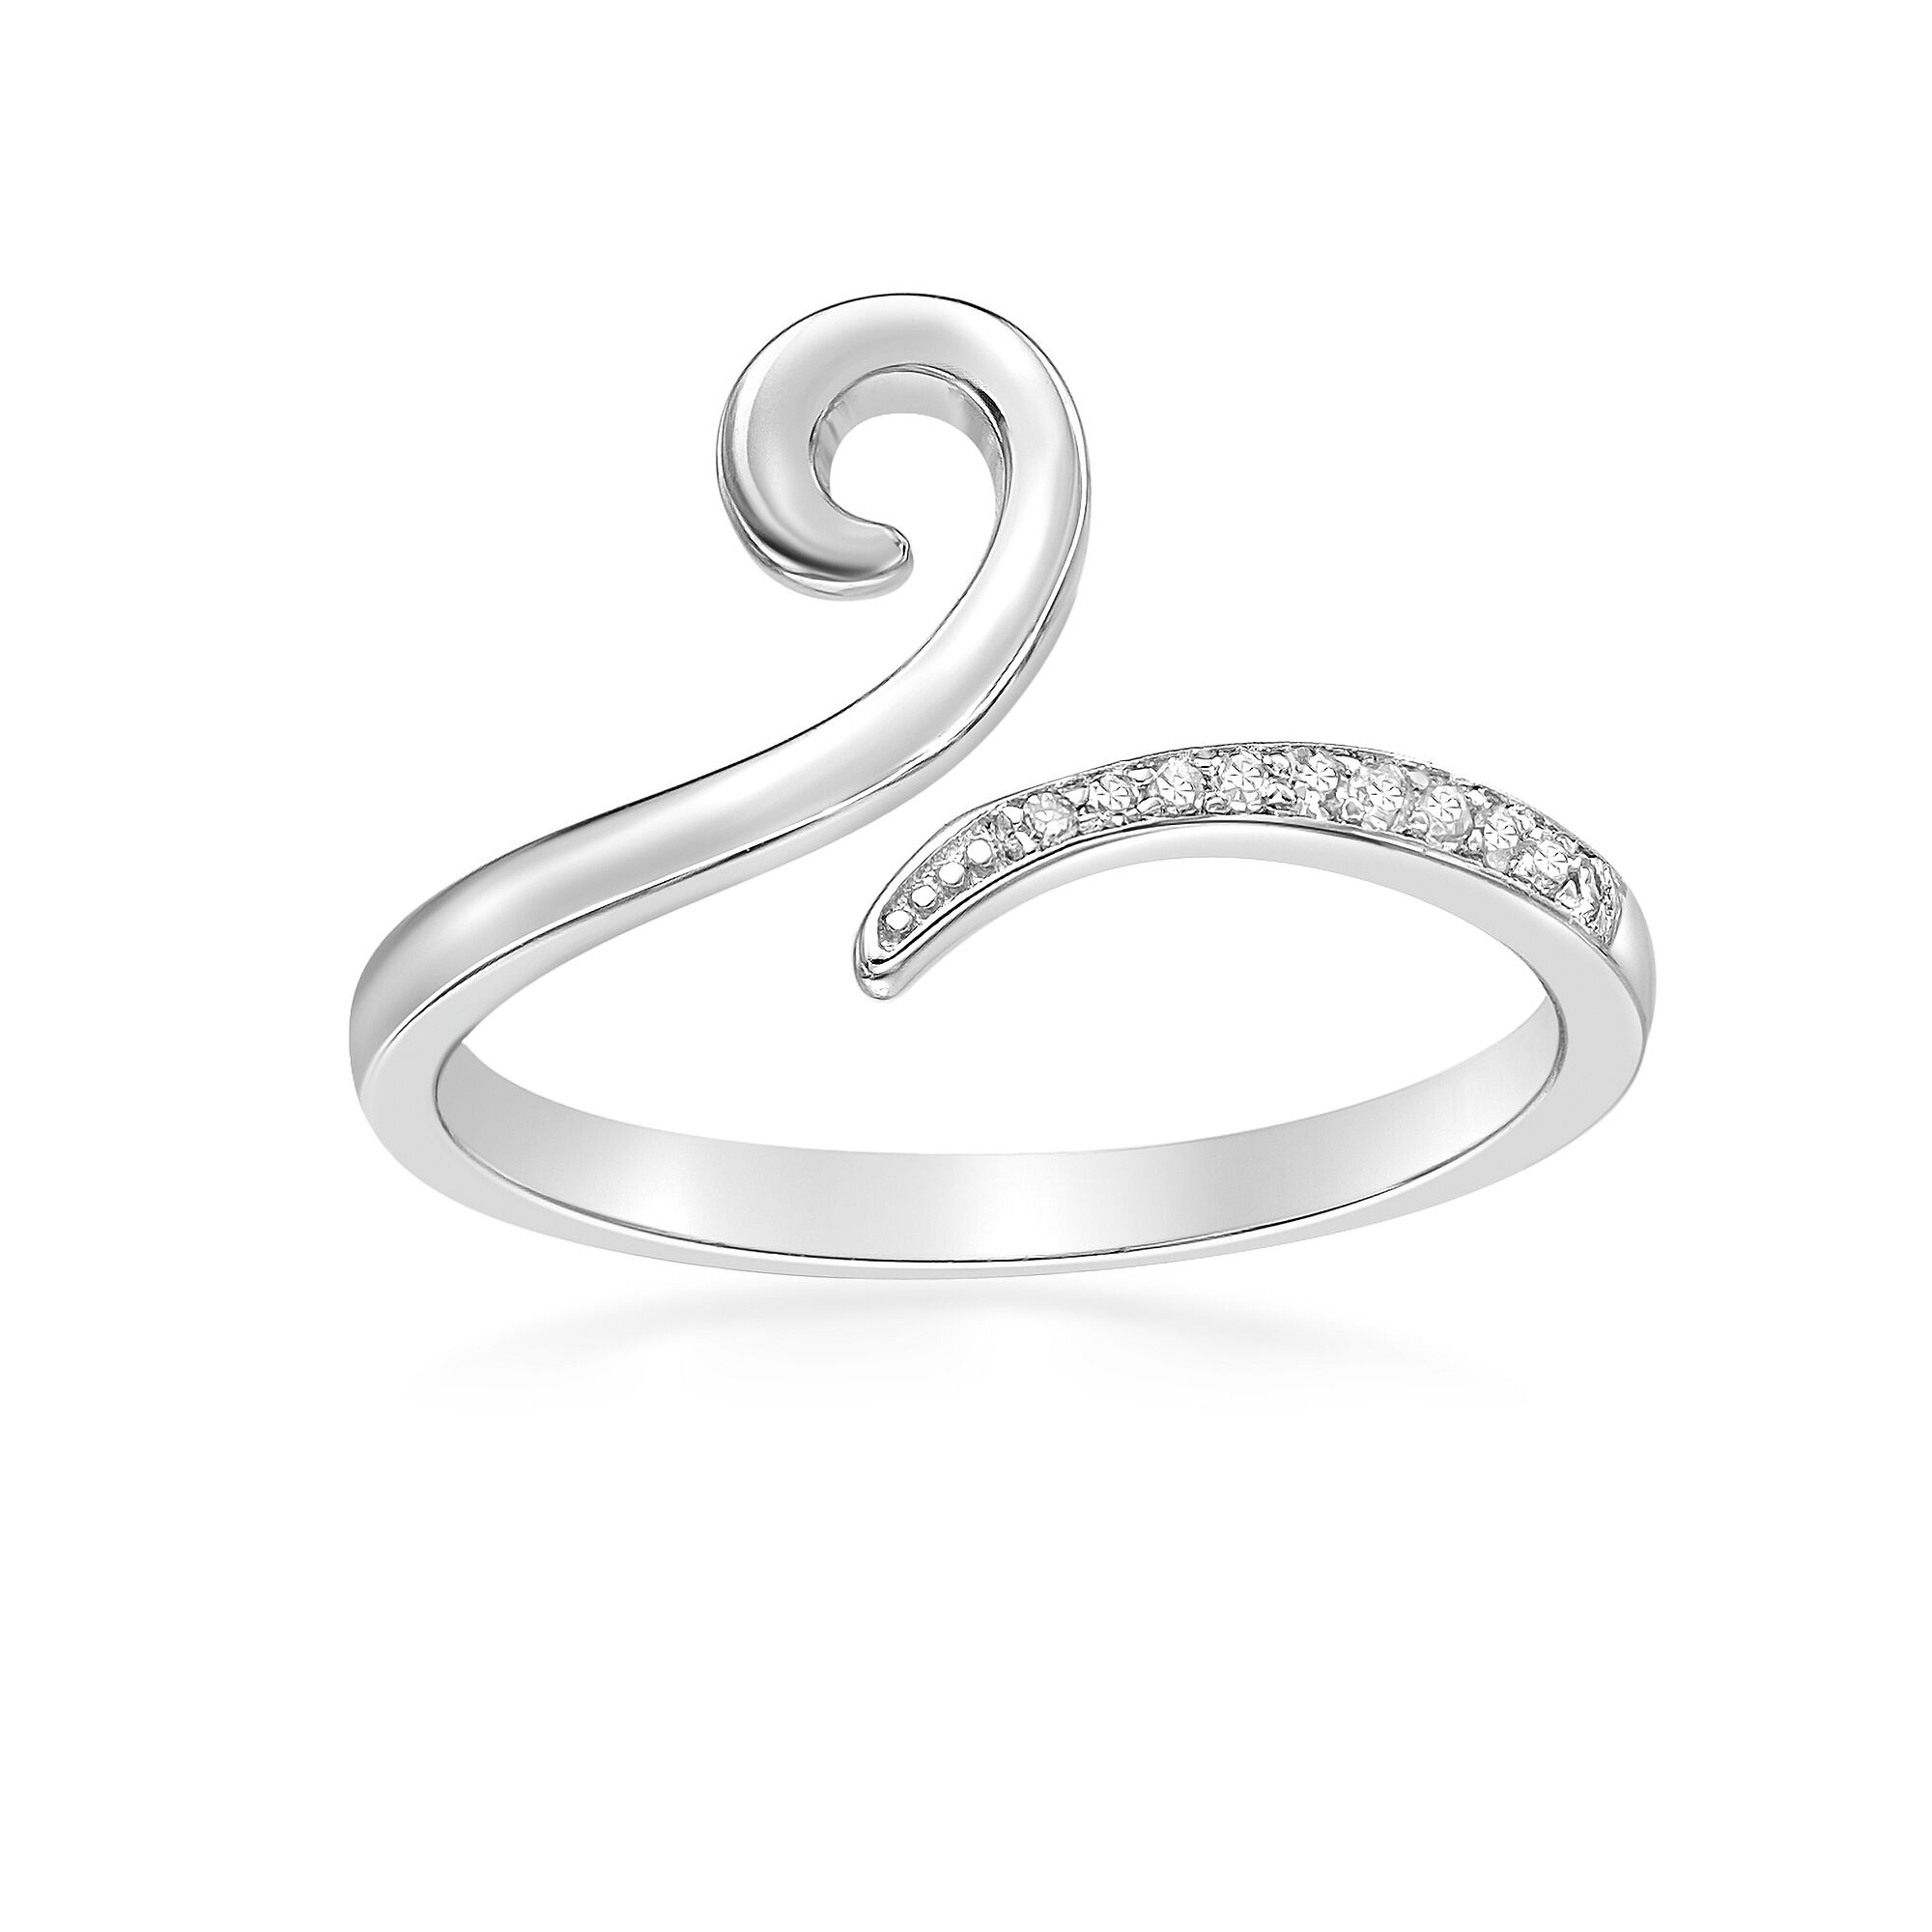 Lavari Jewelers Women's Bypass Adjustable Toe Ring, 925 Sterling Silver, .05 Cttw